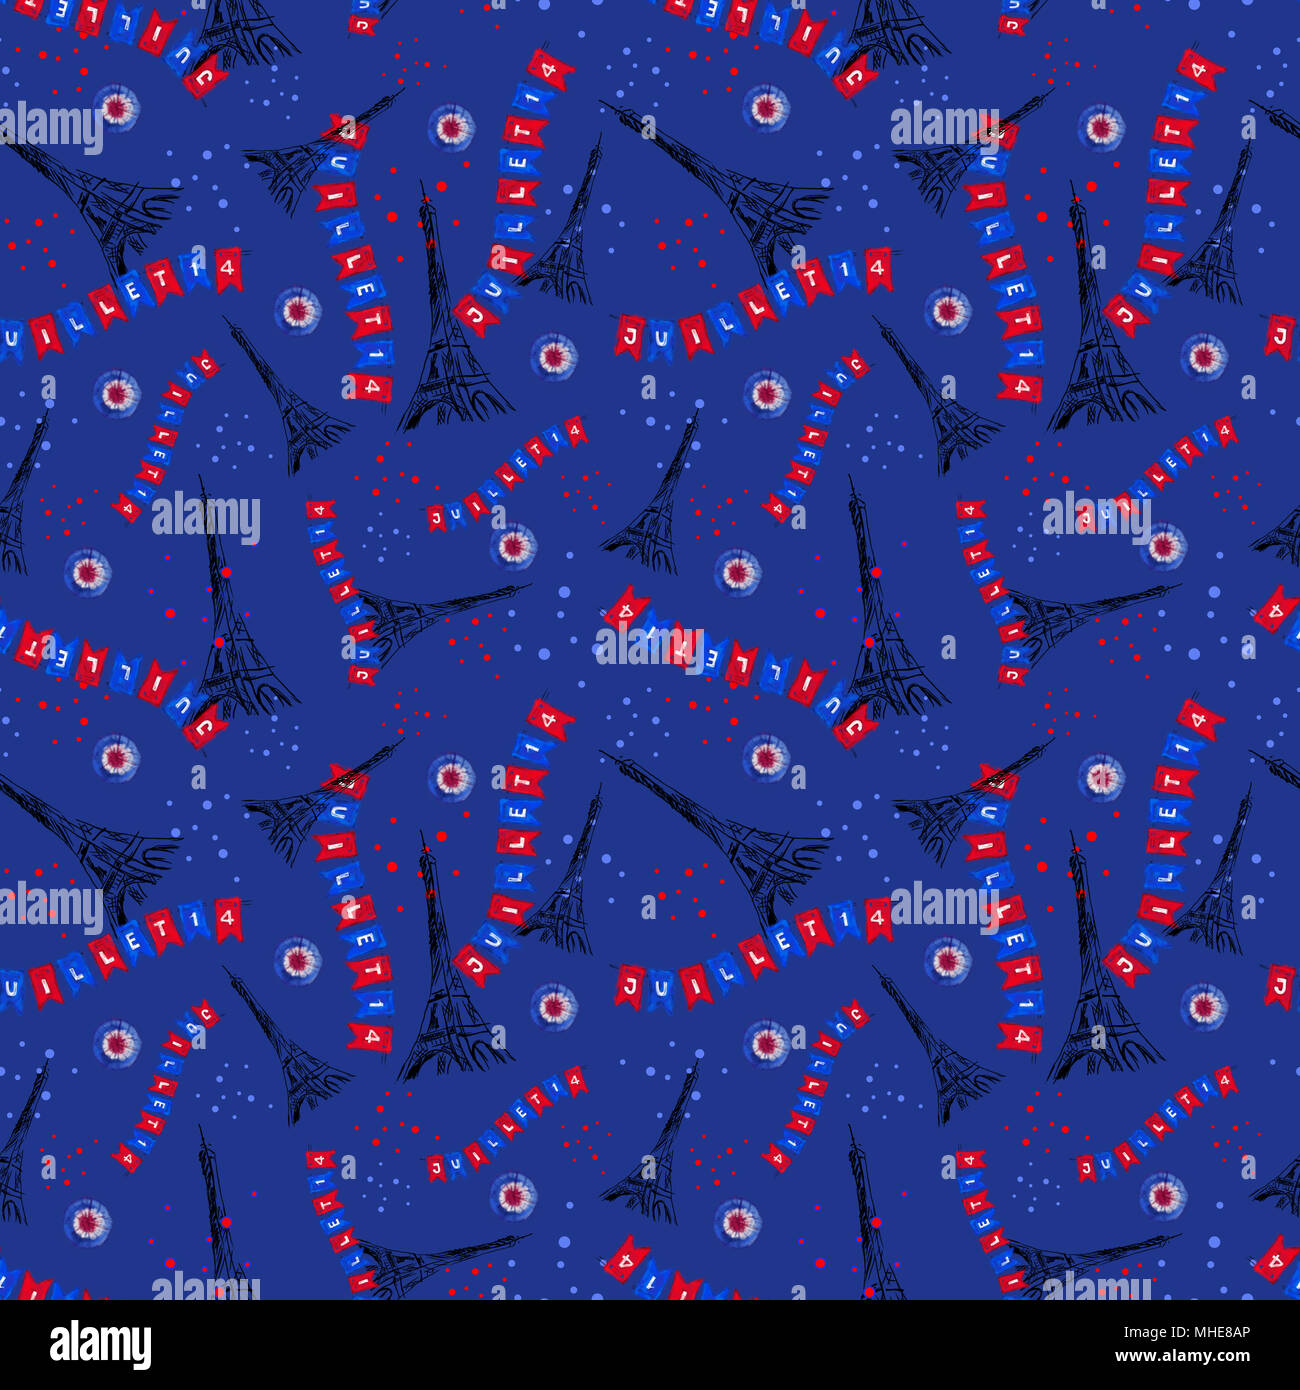 Eiffel Tower Night party seamless Pattern for Bastille Day celebration. Eiffel Tower, Confetti, Cockade, and Street Flag Decoration Rapport for  Print. Stock Photo